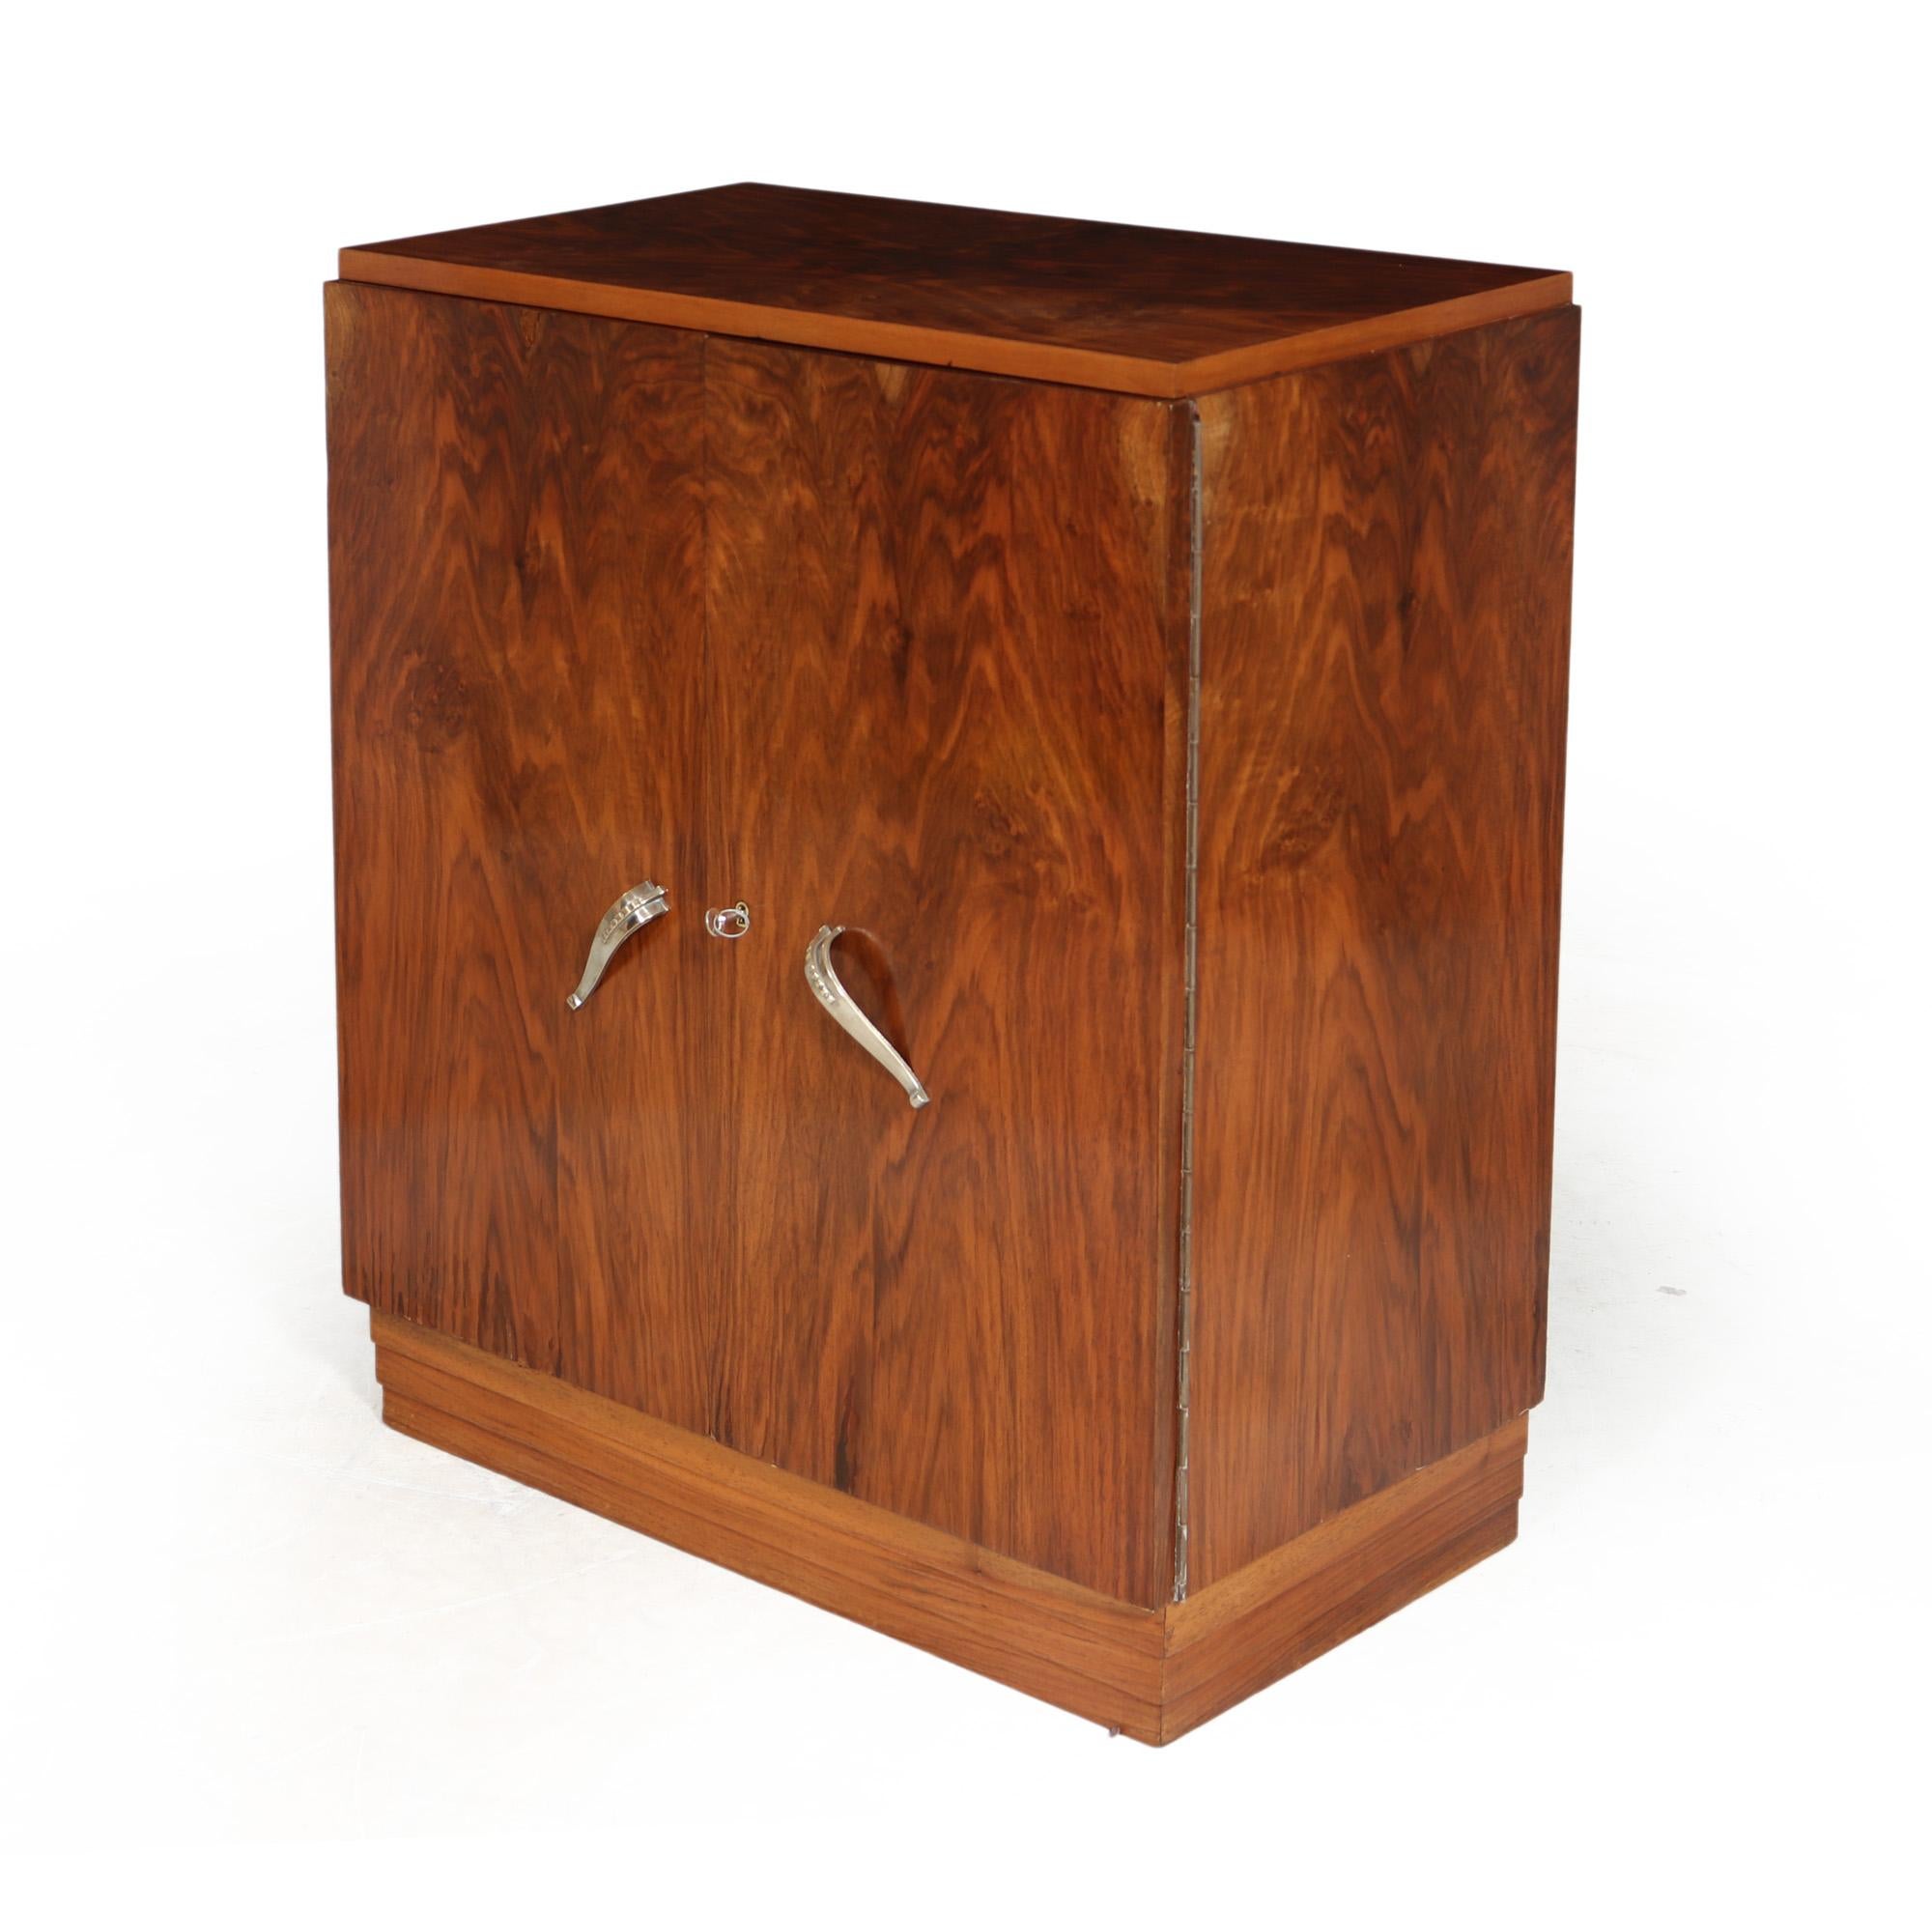 ART DECO OFFICE CABINET
Elevate your home office with a delightful French Art Deco cabinet that exudes elegance and functionality. This meticulously restored cabinet features stunning walnut veneers. Its petite size makes it ideal for limited